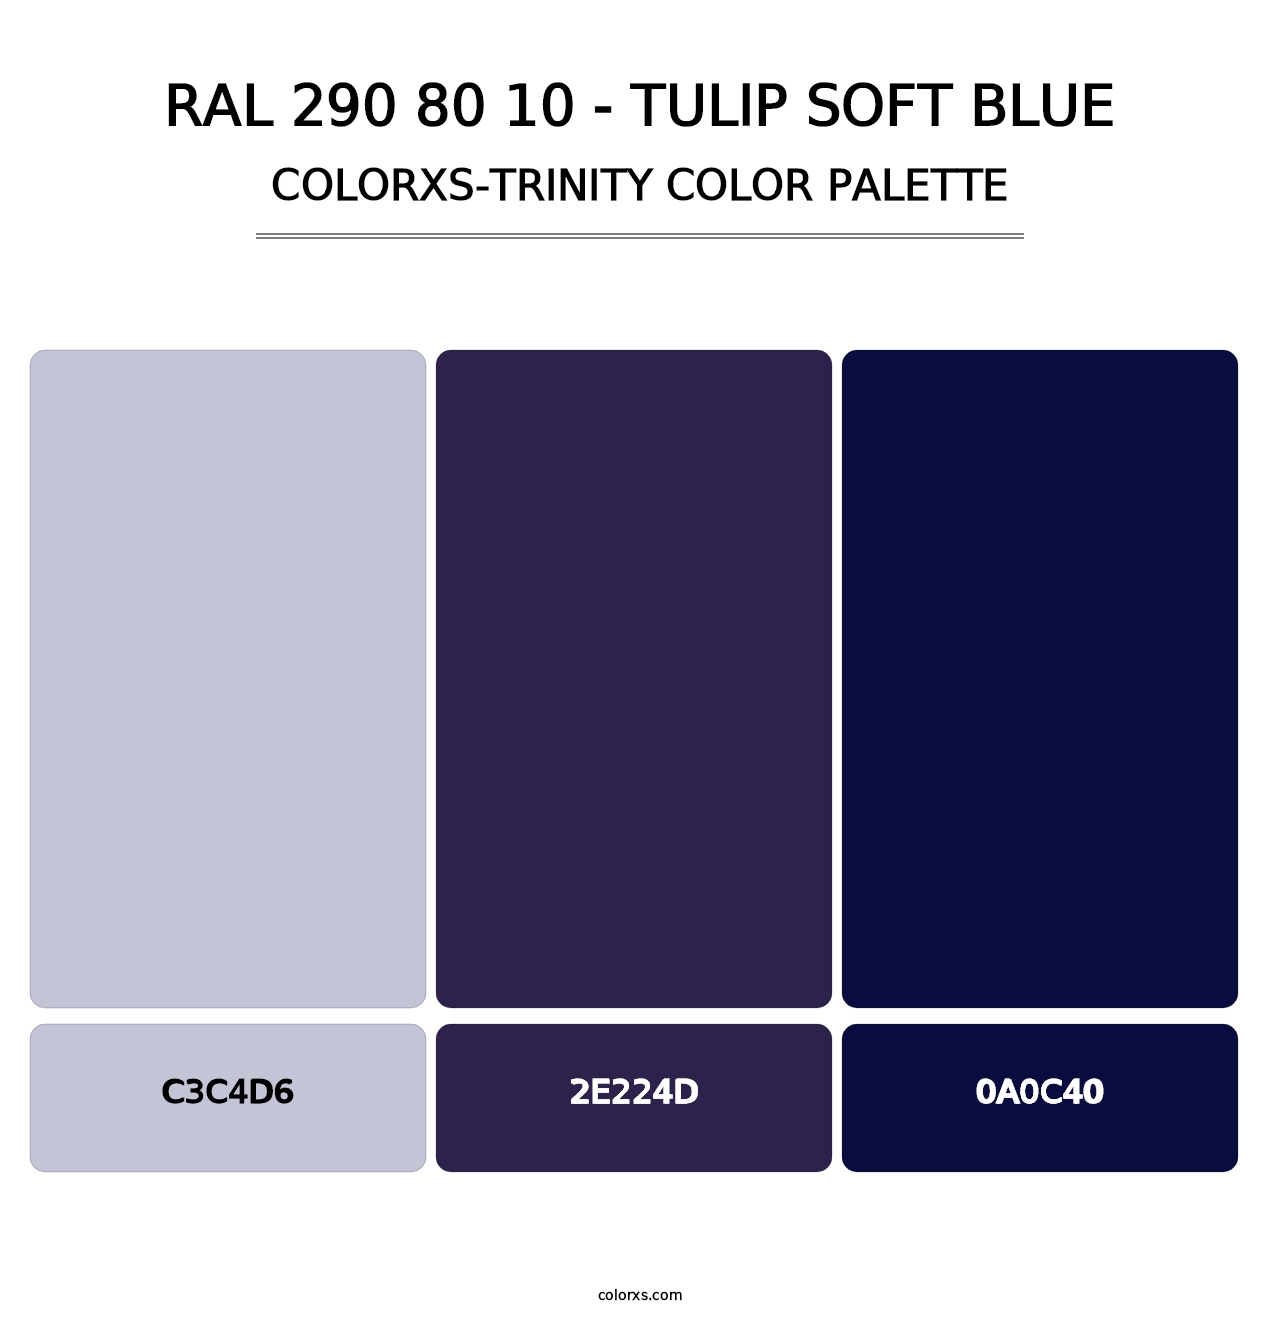 RAL 290 80 10 - Tulip Soft Blue - Colorxs Trinity Palette